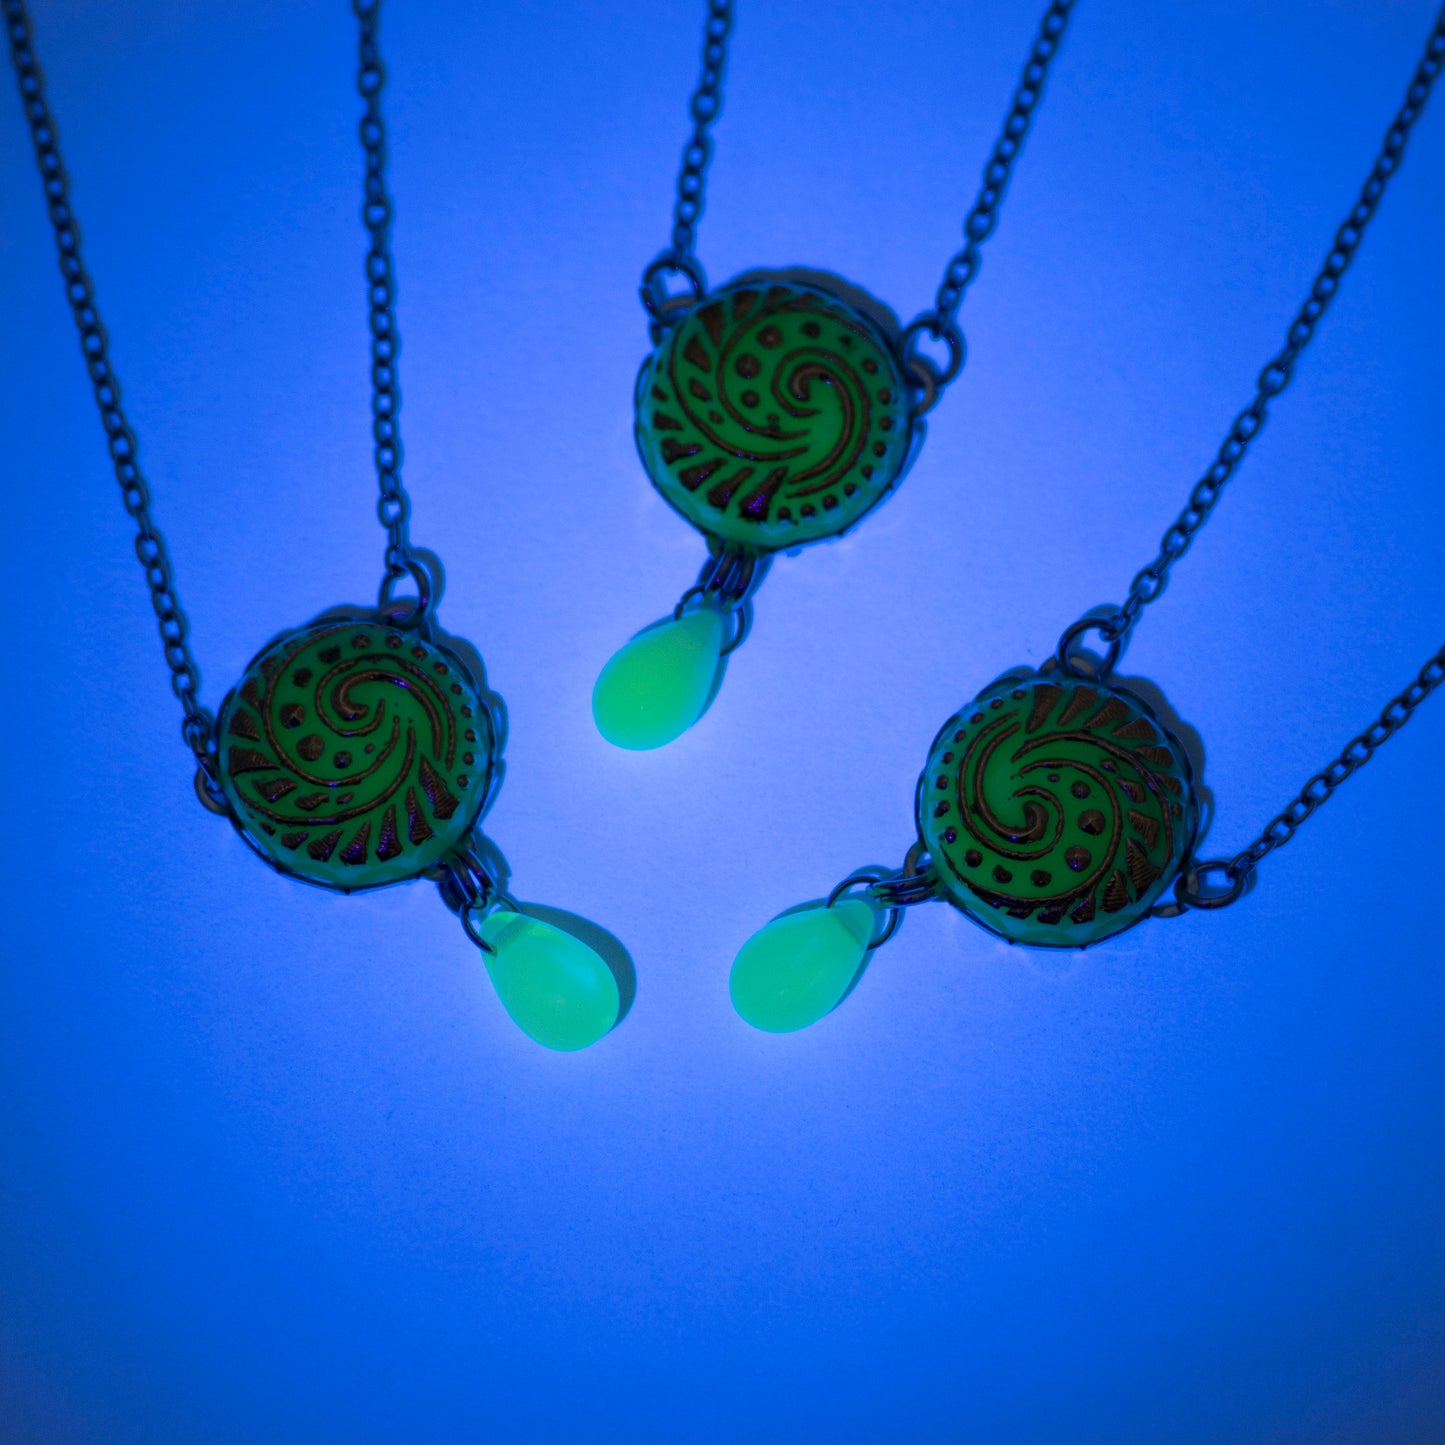 Three button pendant necklaces glowing from a UV blacklight. Uranium glass button in light turquoise color.  Uranium glass button contains 2% uranium dioxide. This small amount in the glass allows it to fluoresce (glow) green under a black light and is also safe to wear.